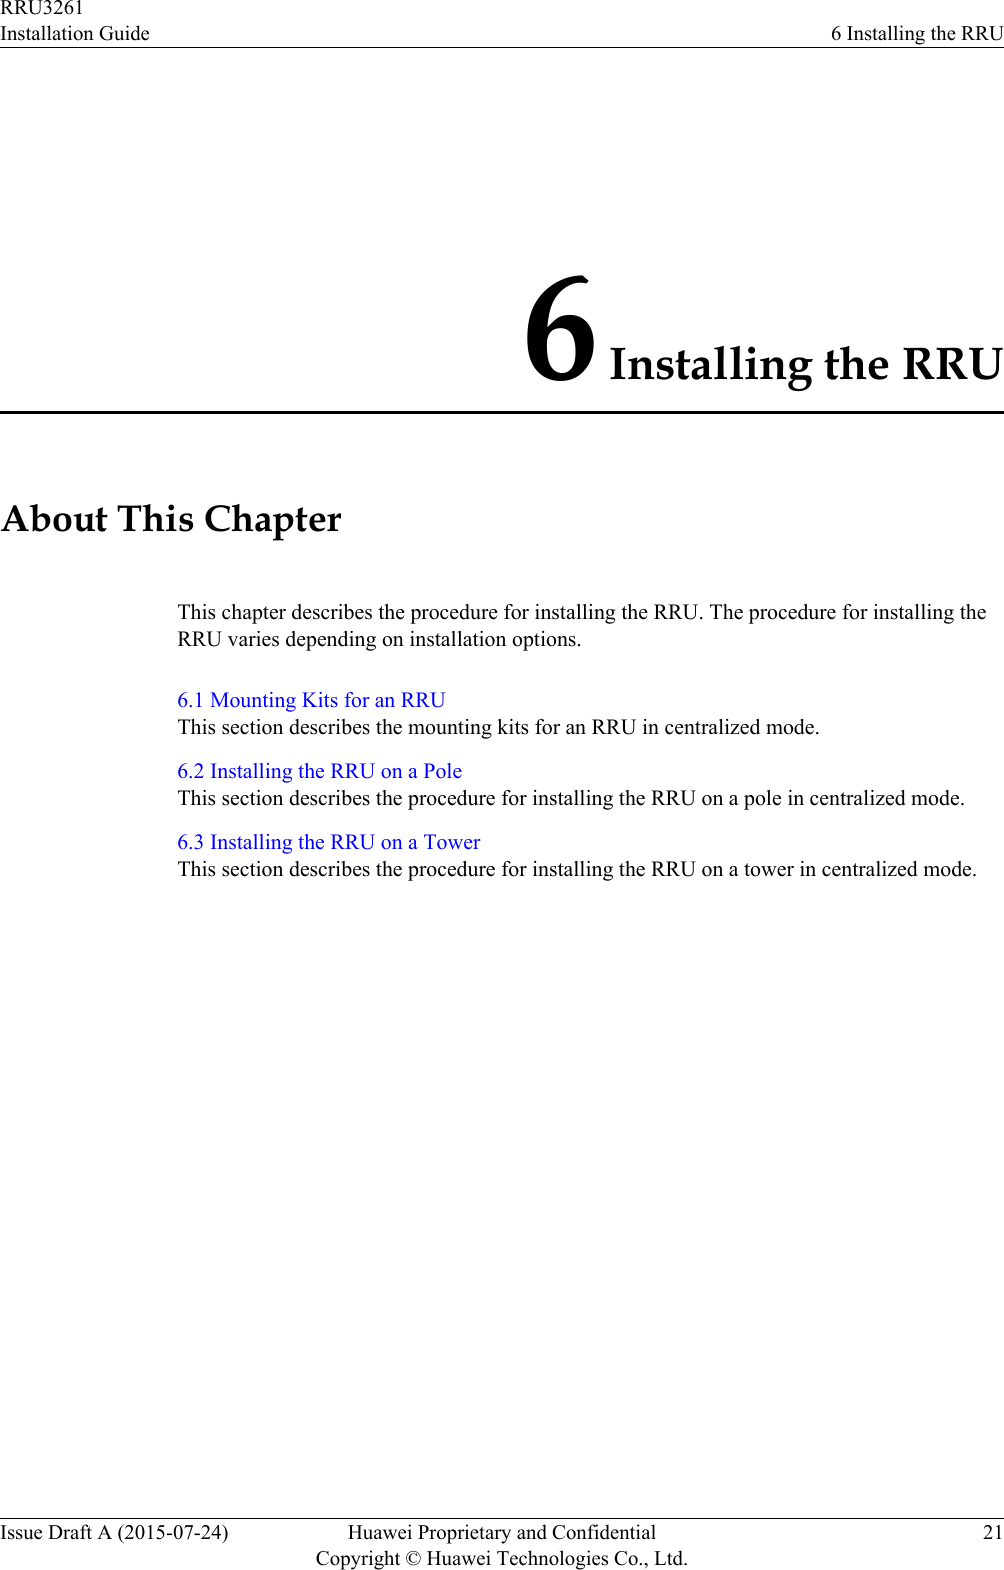 6 Installing the RRUAbout This ChapterThis chapter describes the procedure for installing the RRU. The procedure for installing theRRU varies depending on installation options.6.1 Mounting Kits for an RRUThis section describes the mounting kits for an RRU in centralized mode.6.2 Installing the RRU on a PoleThis section describes the procedure for installing the RRU on a pole in centralized mode.6.3 Installing the RRU on a TowerThis section describes the procedure for installing the RRU on a tower in centralized mode.RRU3261Installation Guide 6 Installing the RRUIssue Draft A (2015-07-24) Huawei Proprietary and ConfidentialCopyright © Huawei Technologies Co., Ltd.21